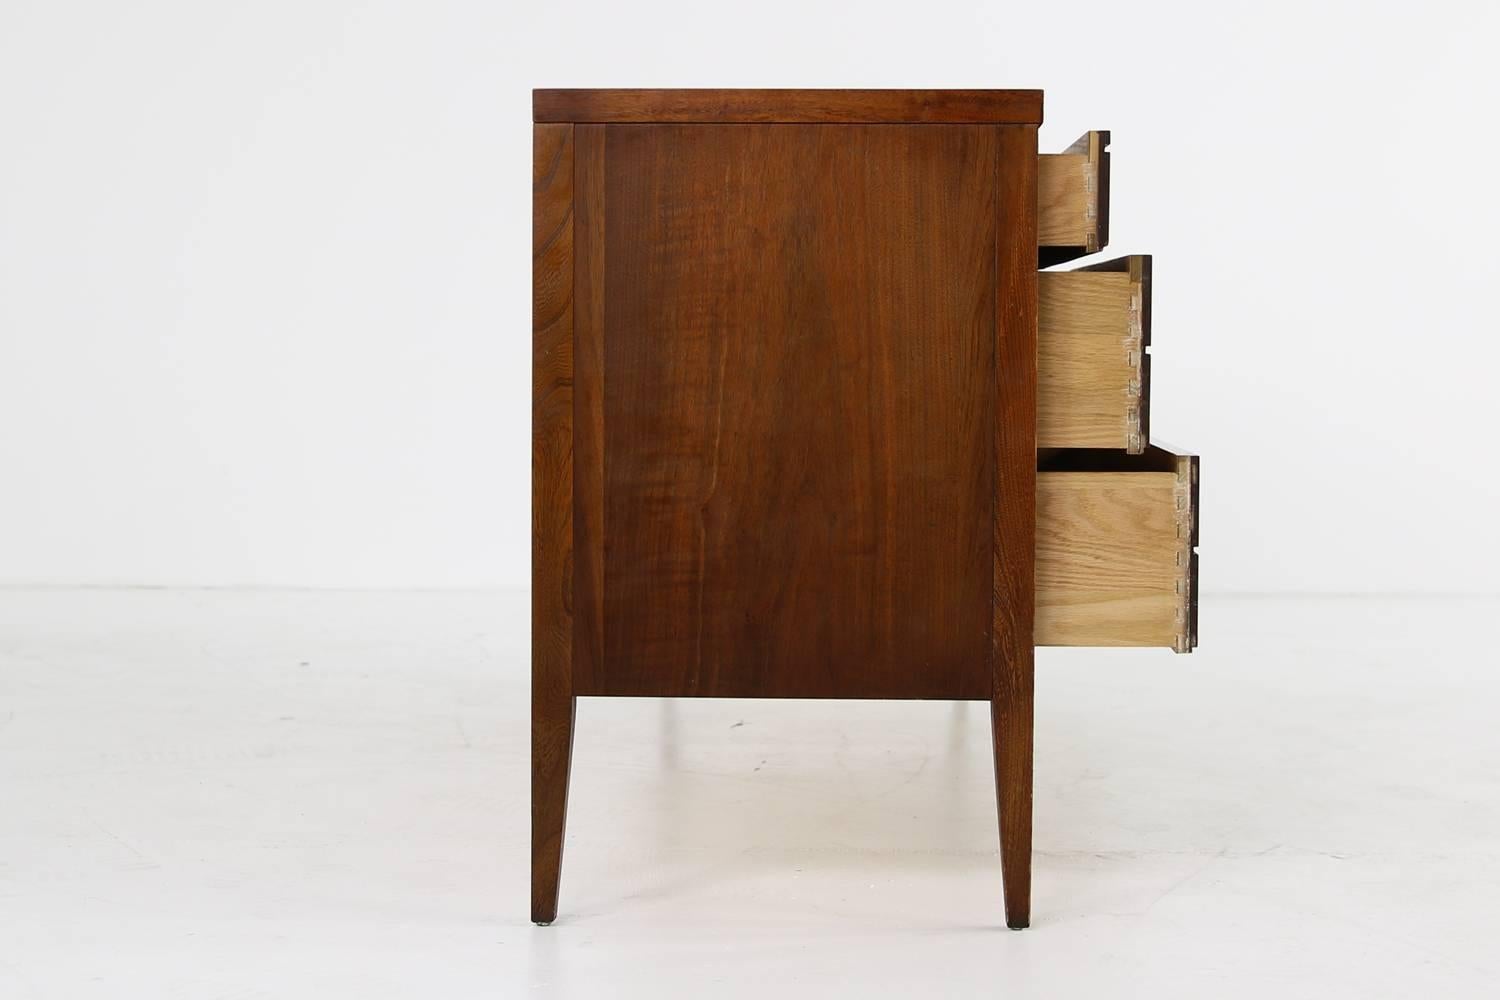 Metal 1950s American Walnut Sideboard, Chest of Six Drawers, Mid-Century Modern Design